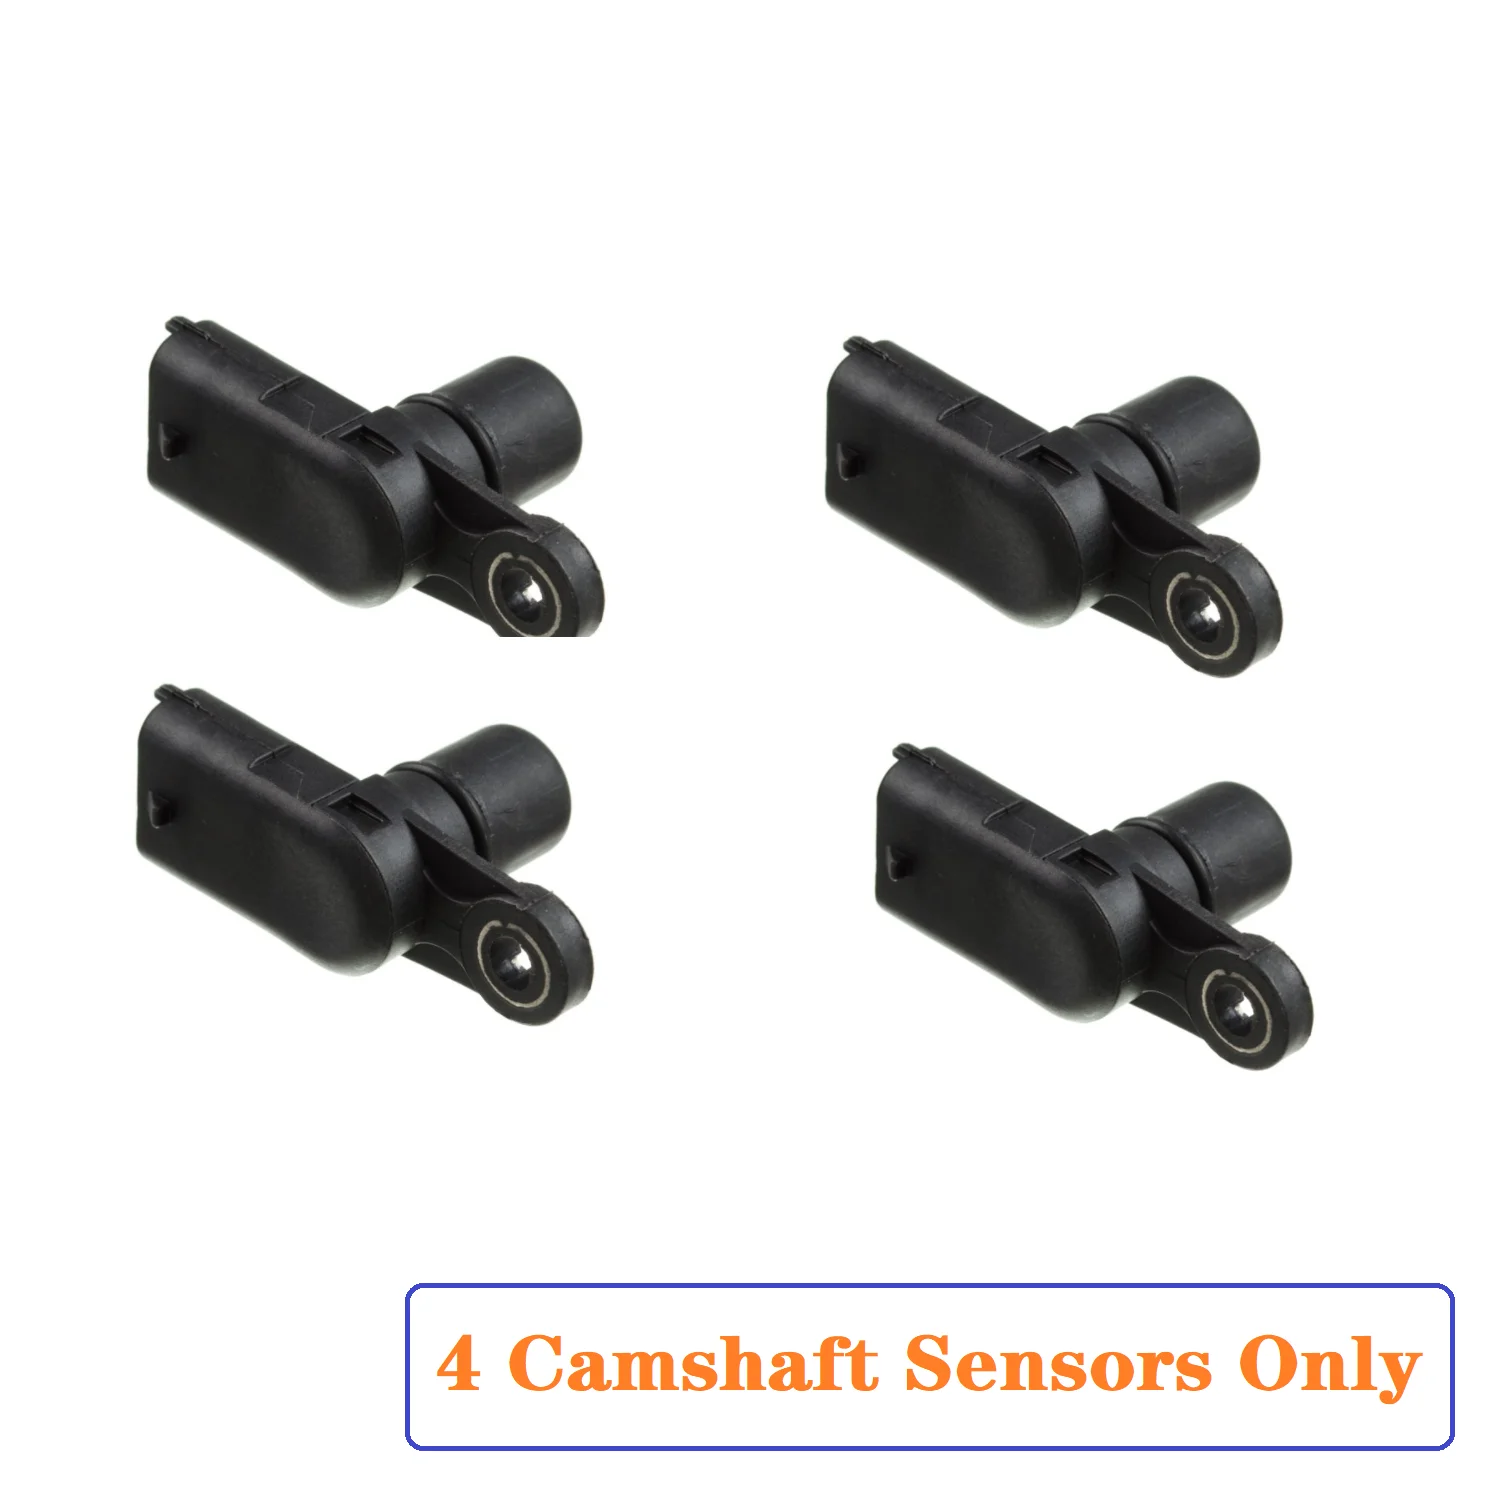 

4 X Camshaft Position Sensor for GM Chevy Buick Cadillac 3.0L 3.6L V6 PC908, 12615371, 12684186, 12 615 371, 12 684 186